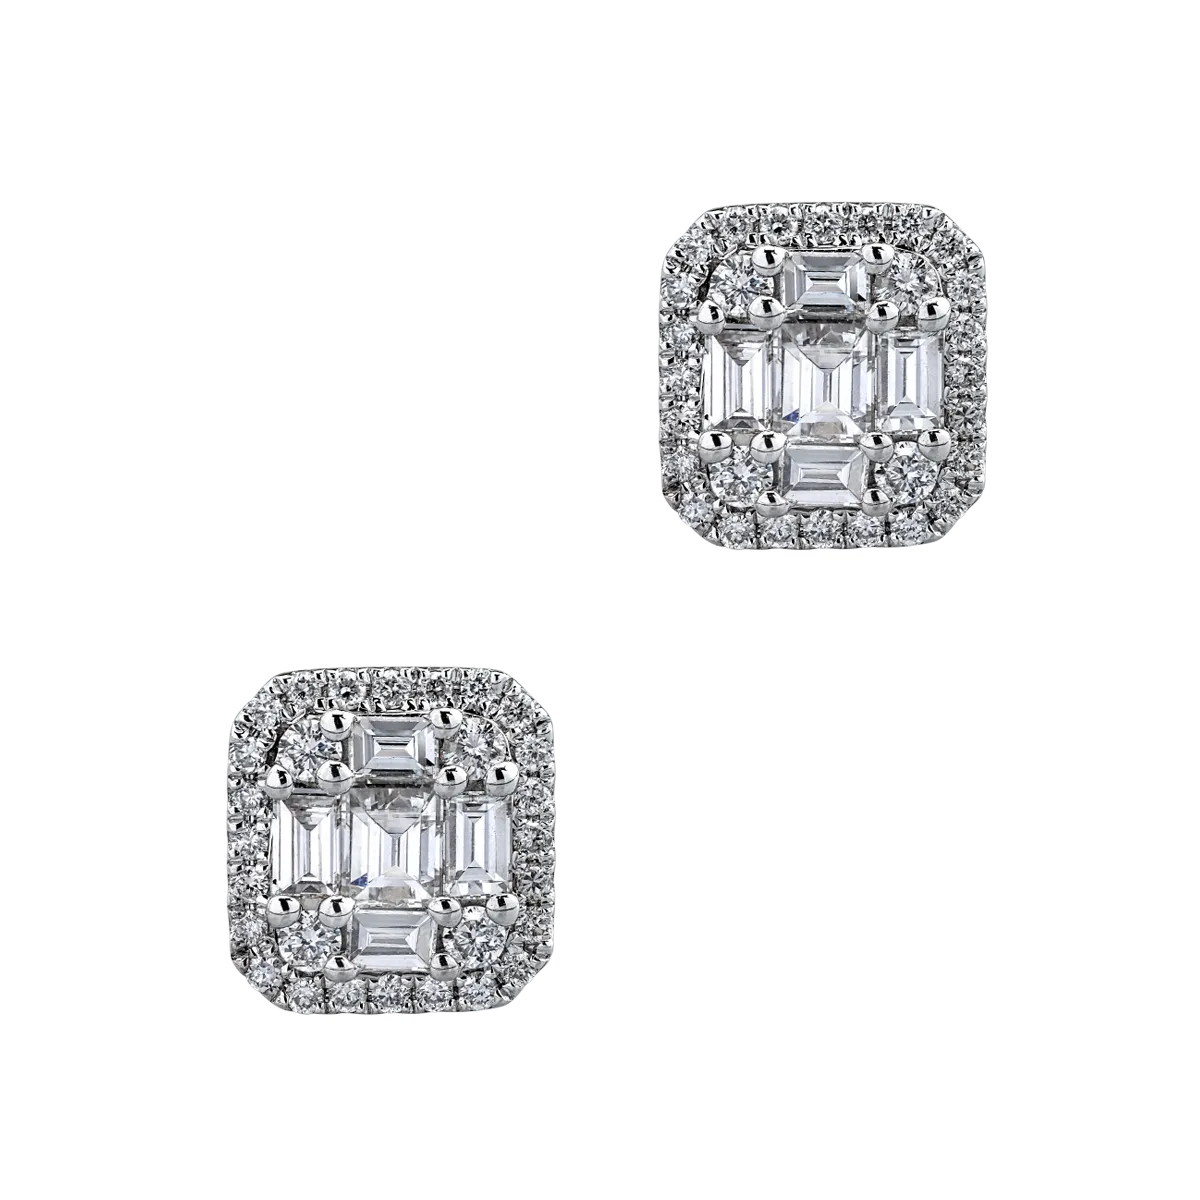 18K white gold earrings with 0.55ct diamonds